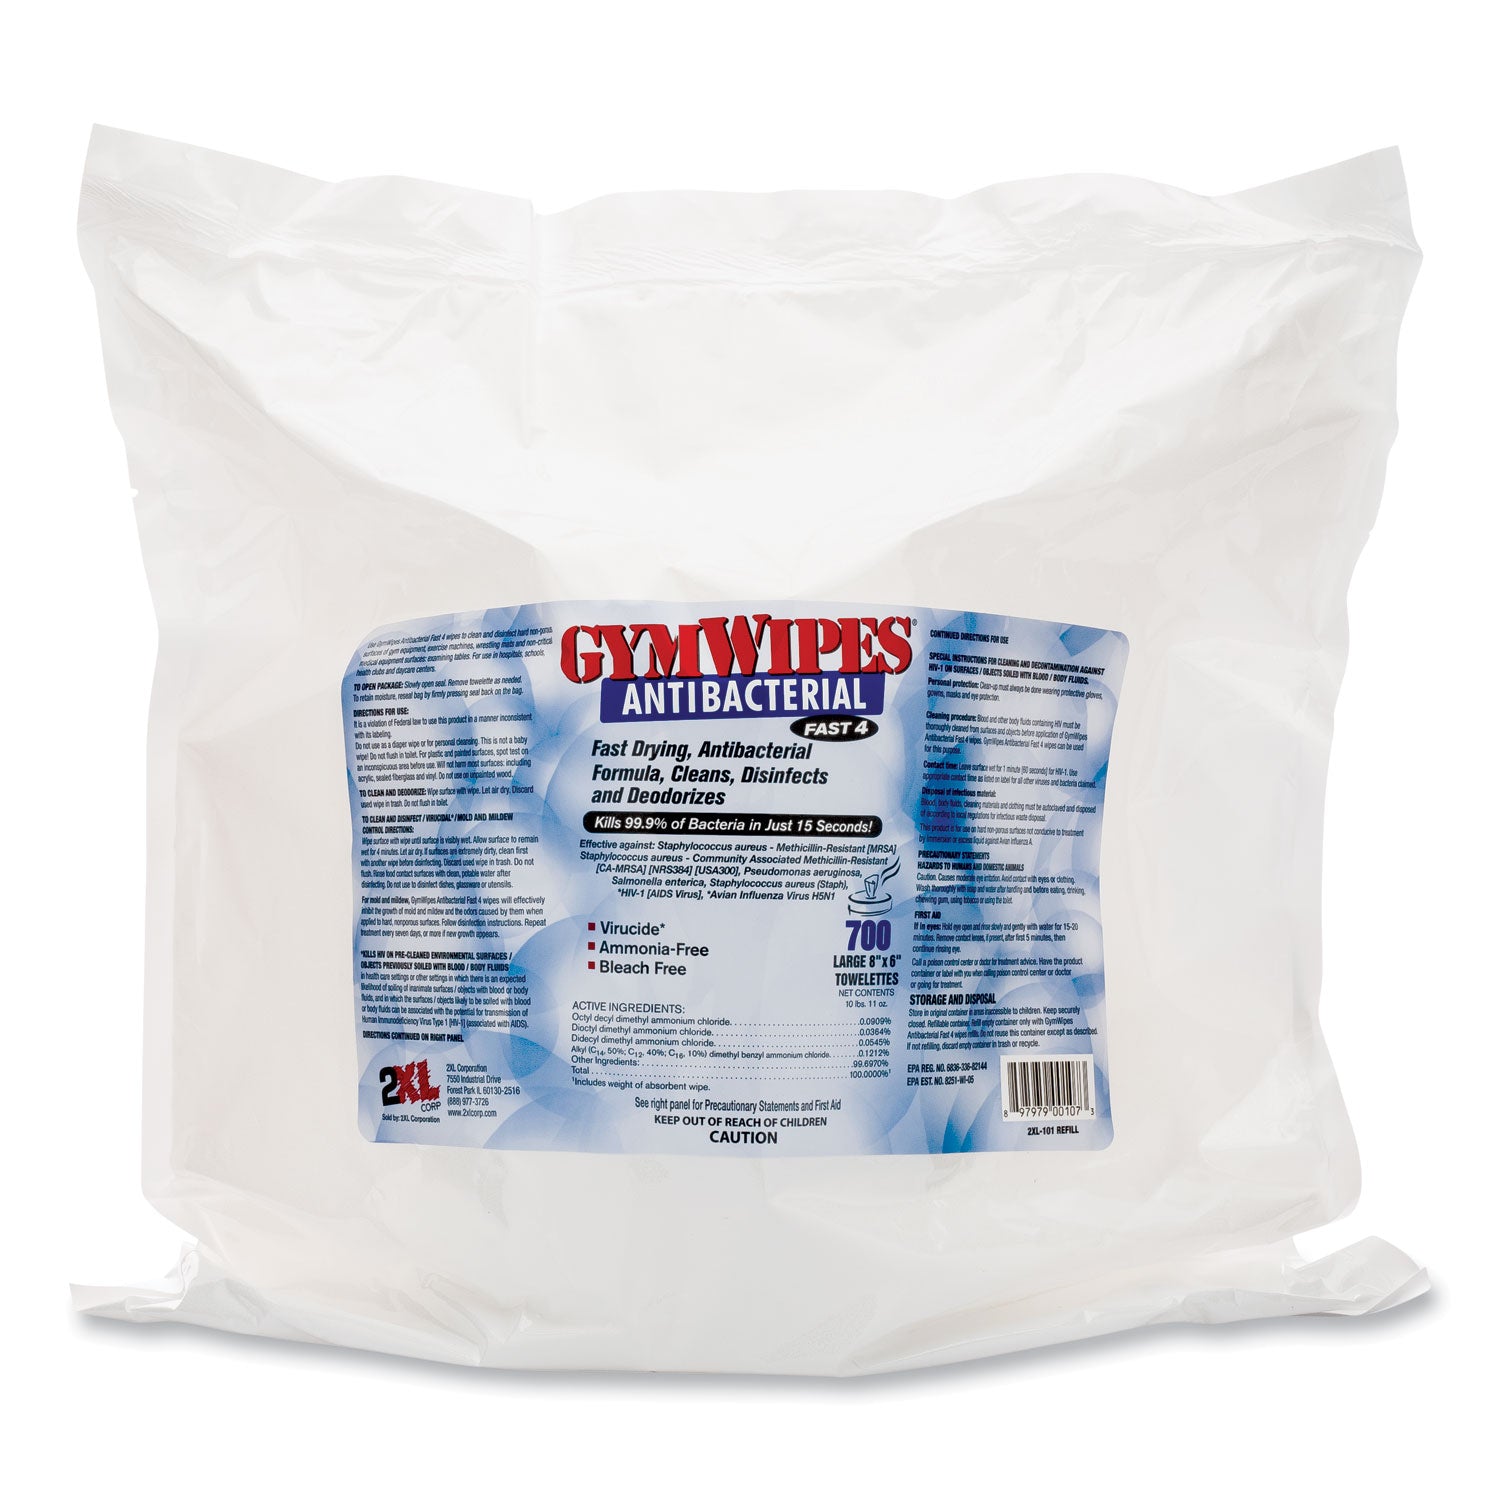 Antibacterial Gym Wipes Refill, 1-Ply, 6 x 8, Unscented, White, 700 Wipes/Pack, 4 Packs/Carton - 